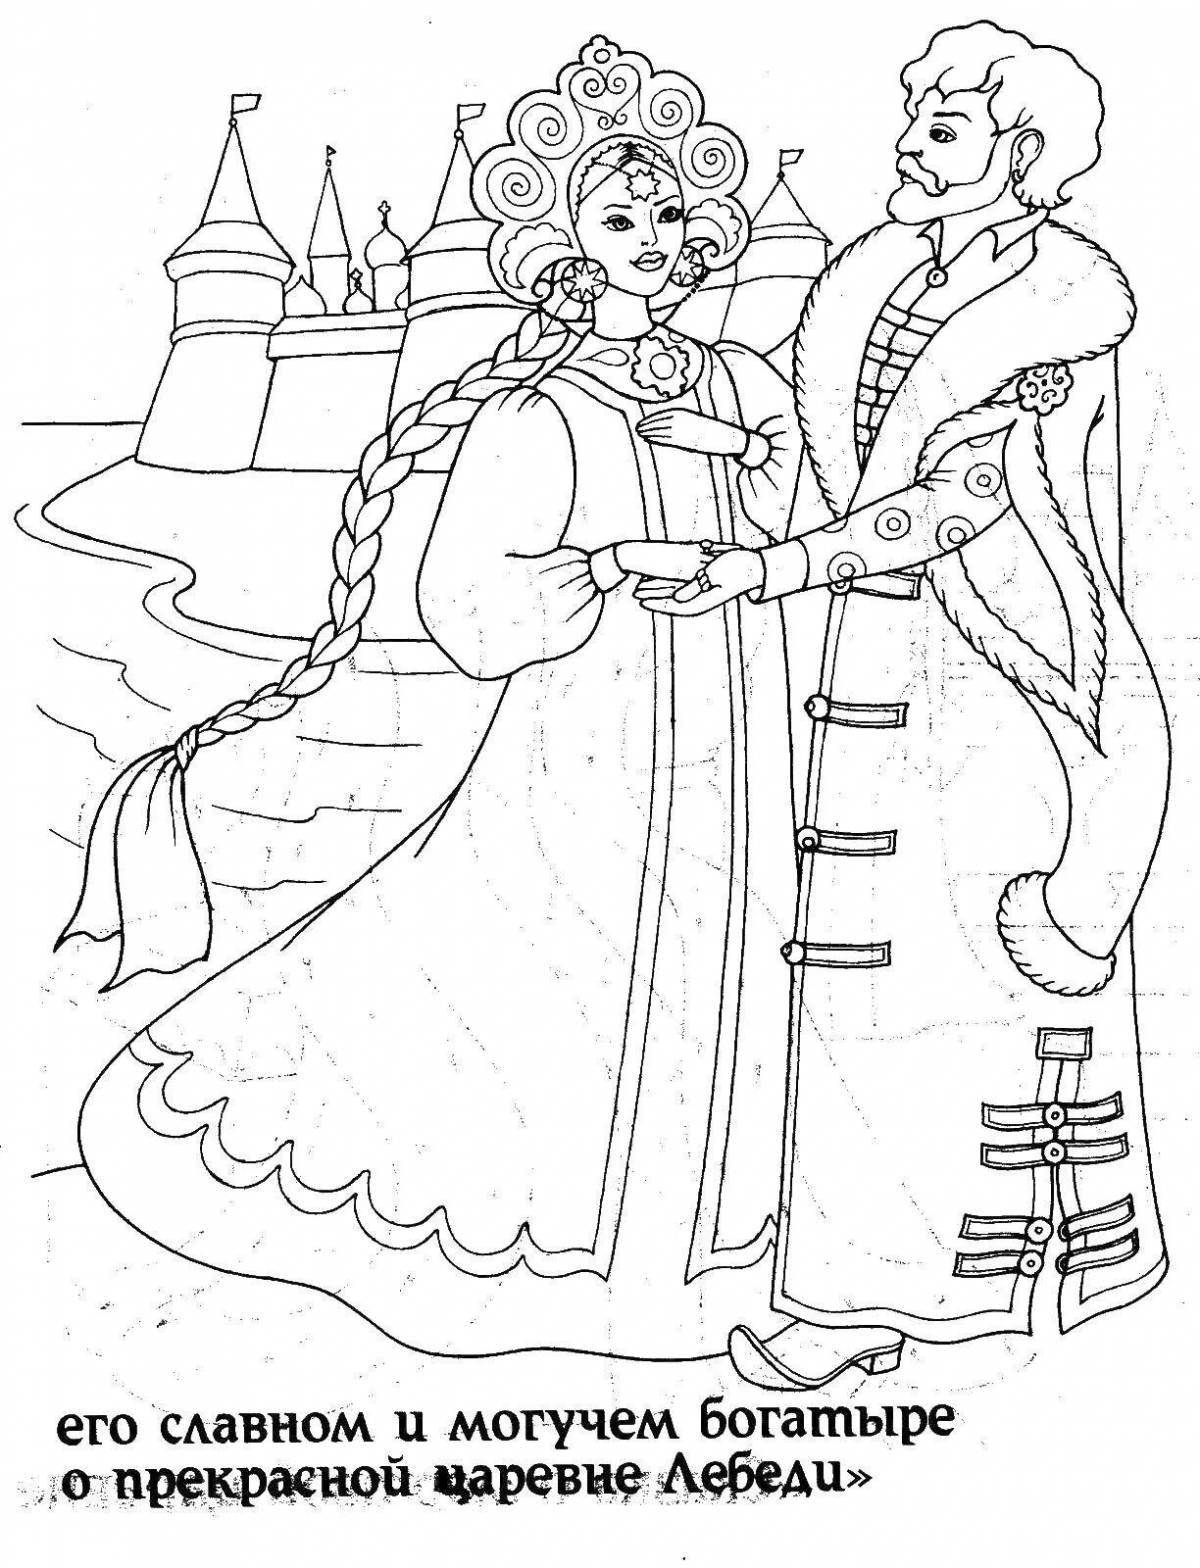 Glorious coloring book for children 3-4 years old based on Pushkin's fairy tales